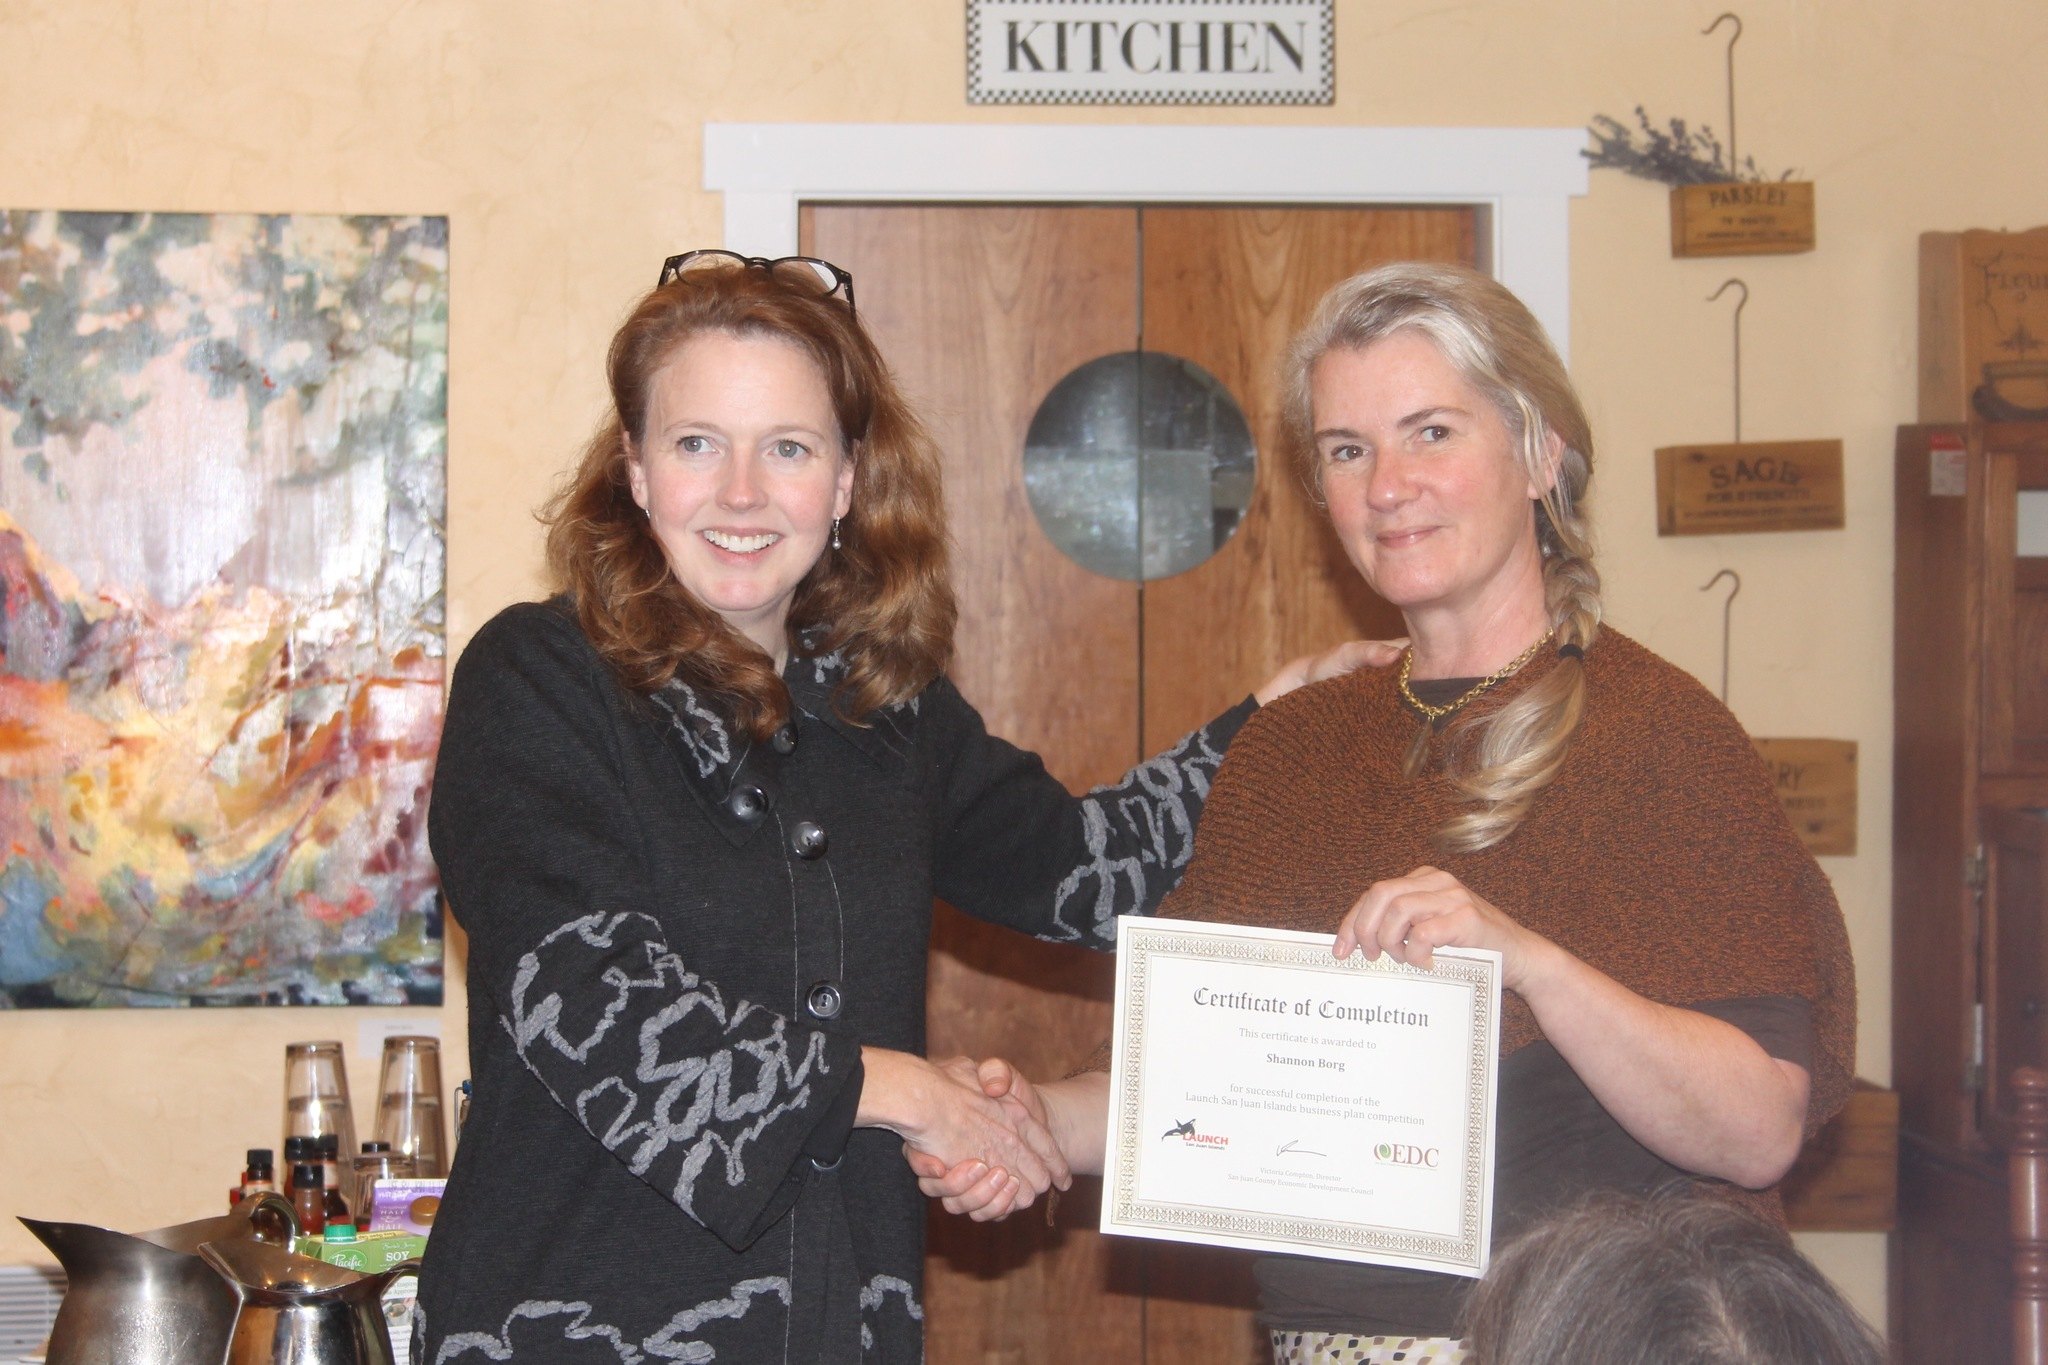 Shannon Borg of San Juan Island receives third place in the 2016 Launch San Juan Islands business competition and $500 for her agriculture writing and marketing company called Oysterous & Vine.